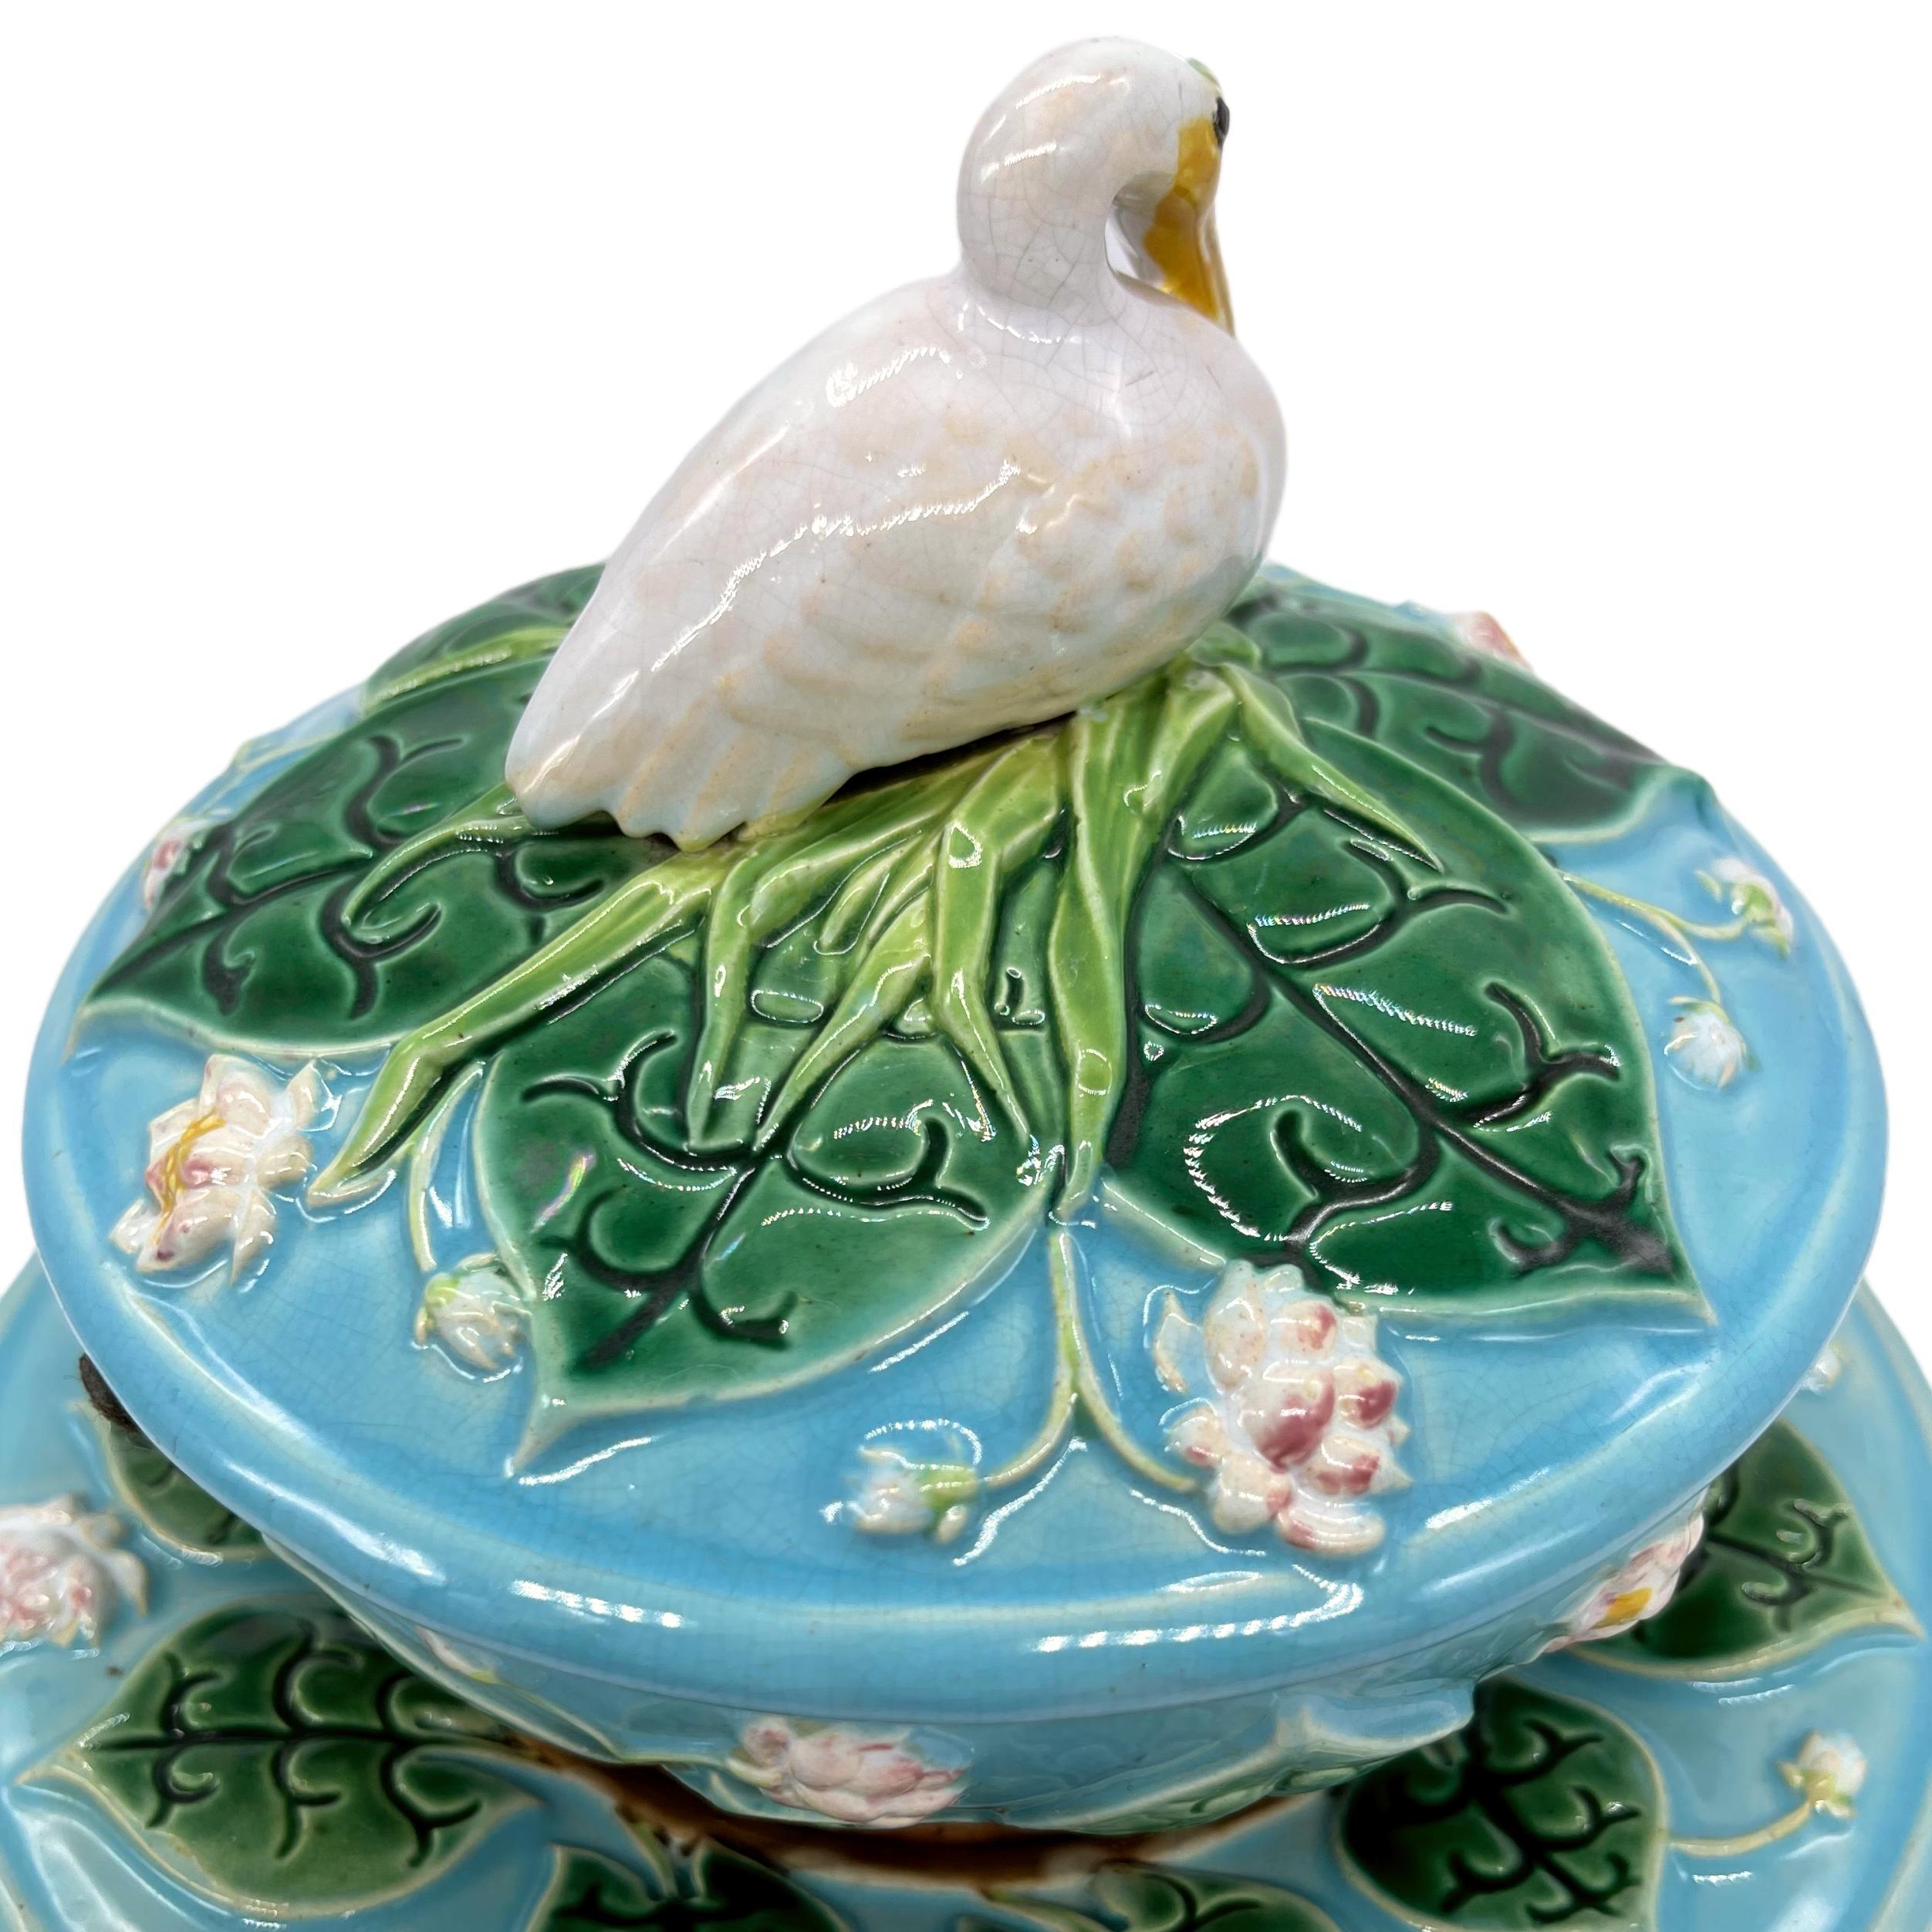 George Jones Majolica Pâté Server with Stand & Cover, 'Stork' Finial, Dated 1875 4